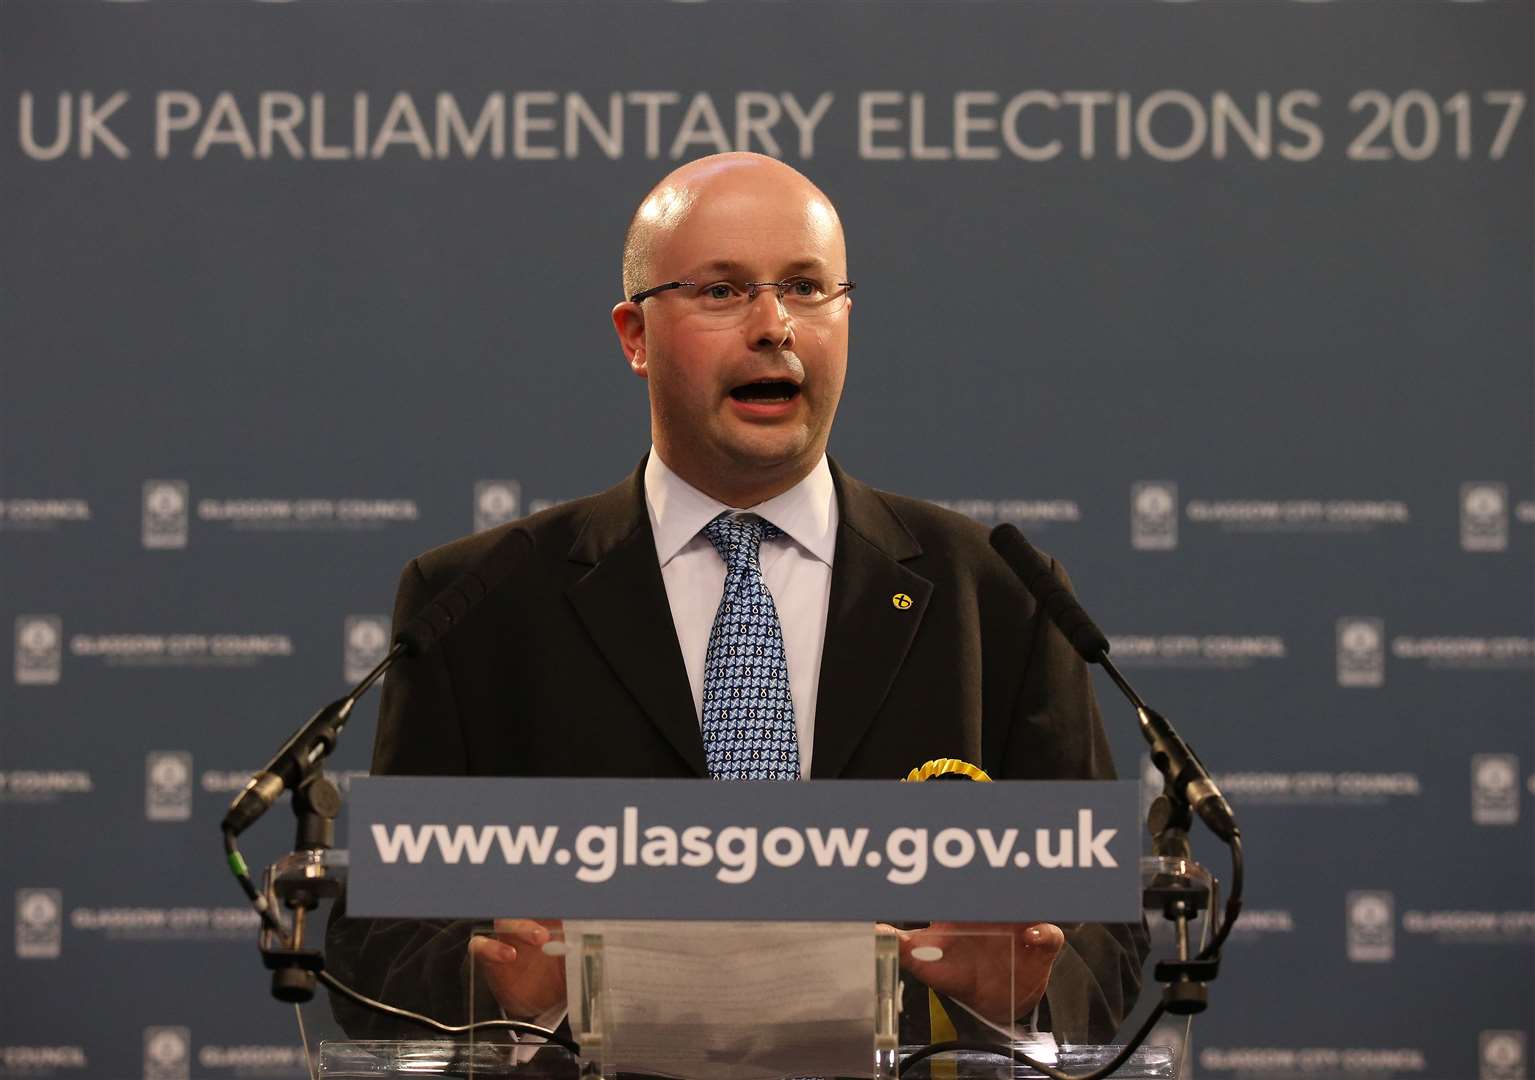 SNP MP Patrick Grady had his membership reinstated in December after it was removed over sexual harassment claims (Andrew Milligan/PA)